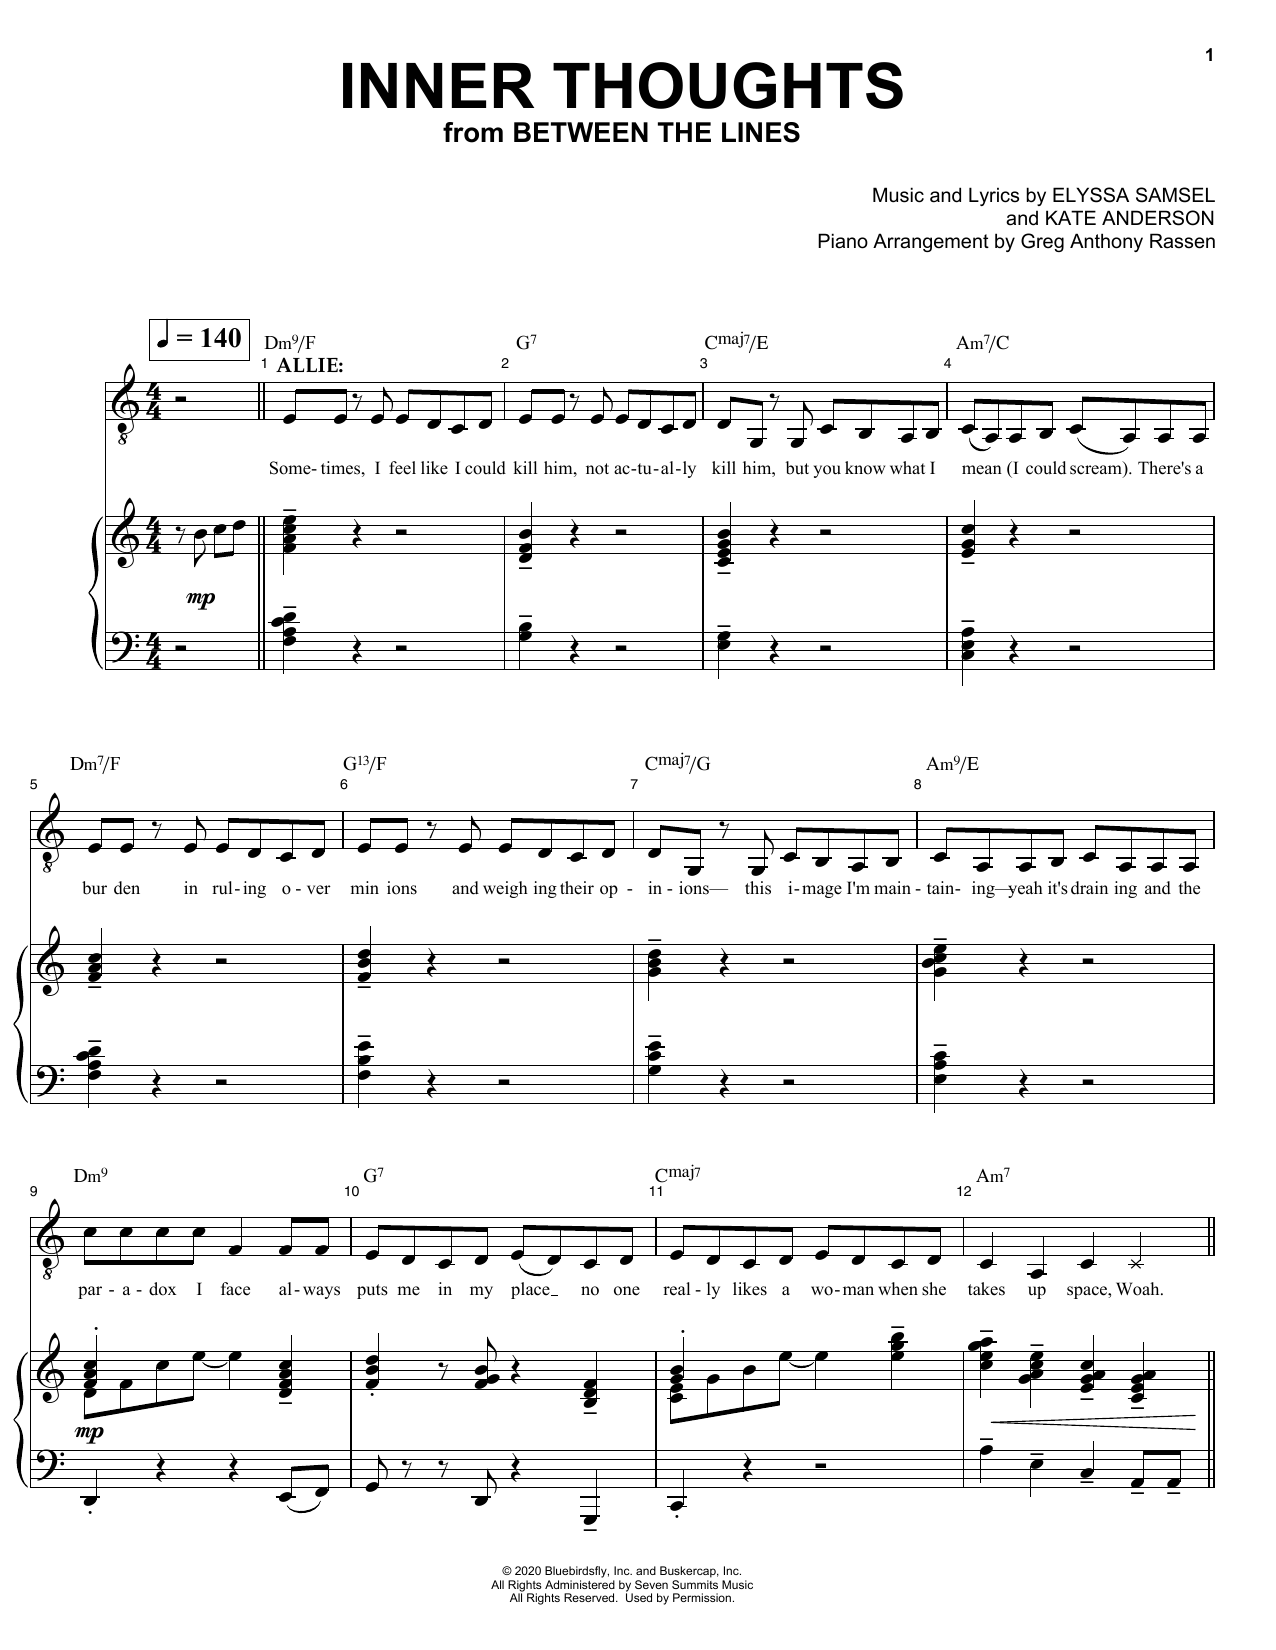 Download Elyssa Samsel & Kate Anderson Inner Thoughts (from Between The Lines) Sheet Music